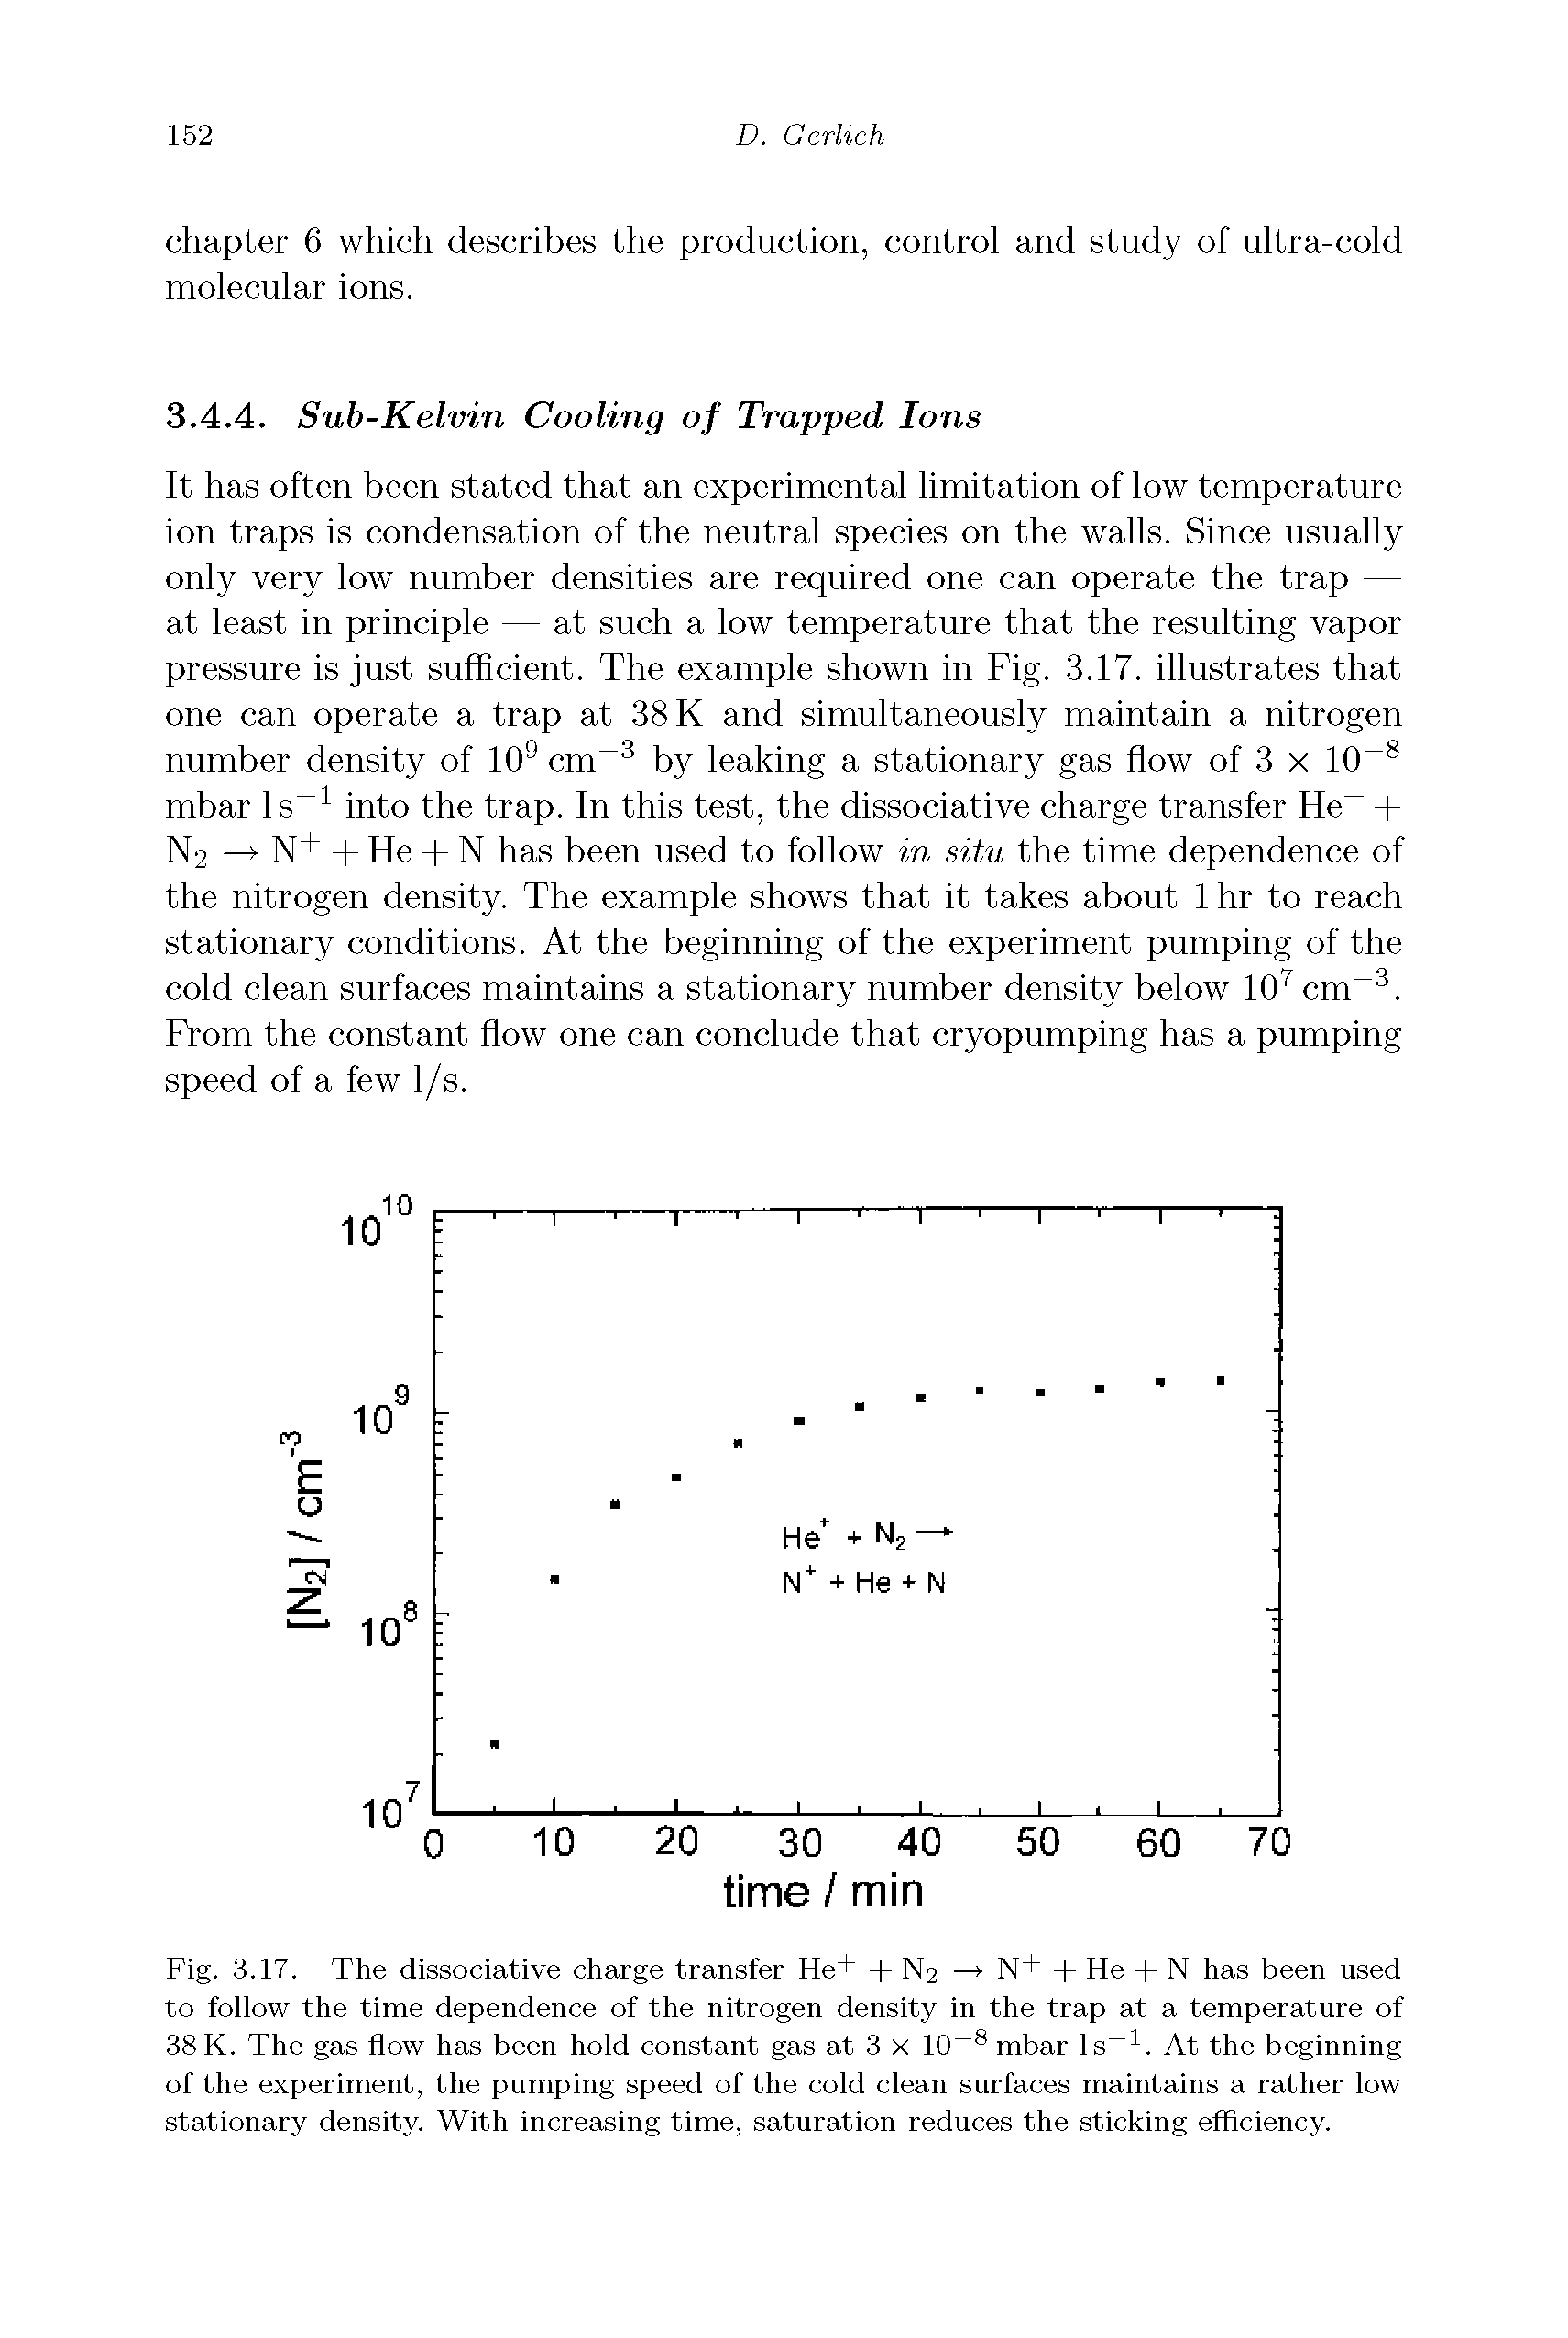 Fig. 3.17. The dissociative charge transfer He+ + N2 —> N+ + He + N has been used to follow the time dependence of the nitrogen density in the trap at a temperature of 38K. The gas flow has been hold constant gas at 3 X 10 mbar Is. At the beginning of the experiment, the pumping speed of the cold clean surfaces maintains a rather low stationary density. With increasing time, saturation reduces the sticking efficiency.